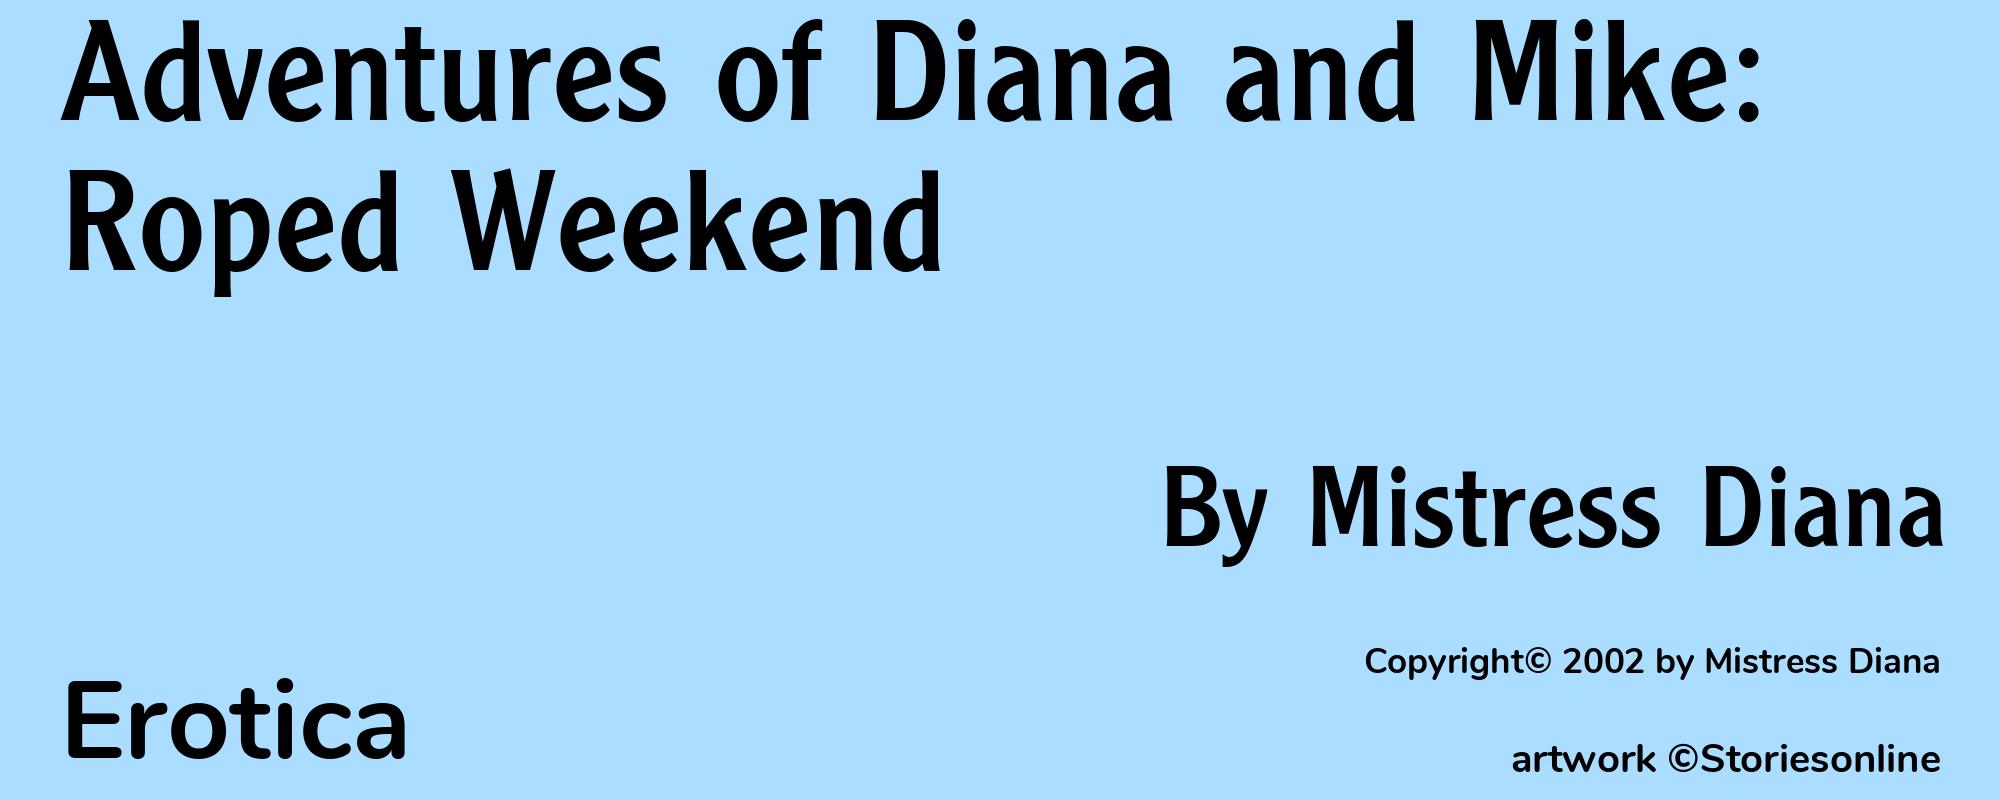 Adventures of Diana and Mike: Roped Weekend - Cover